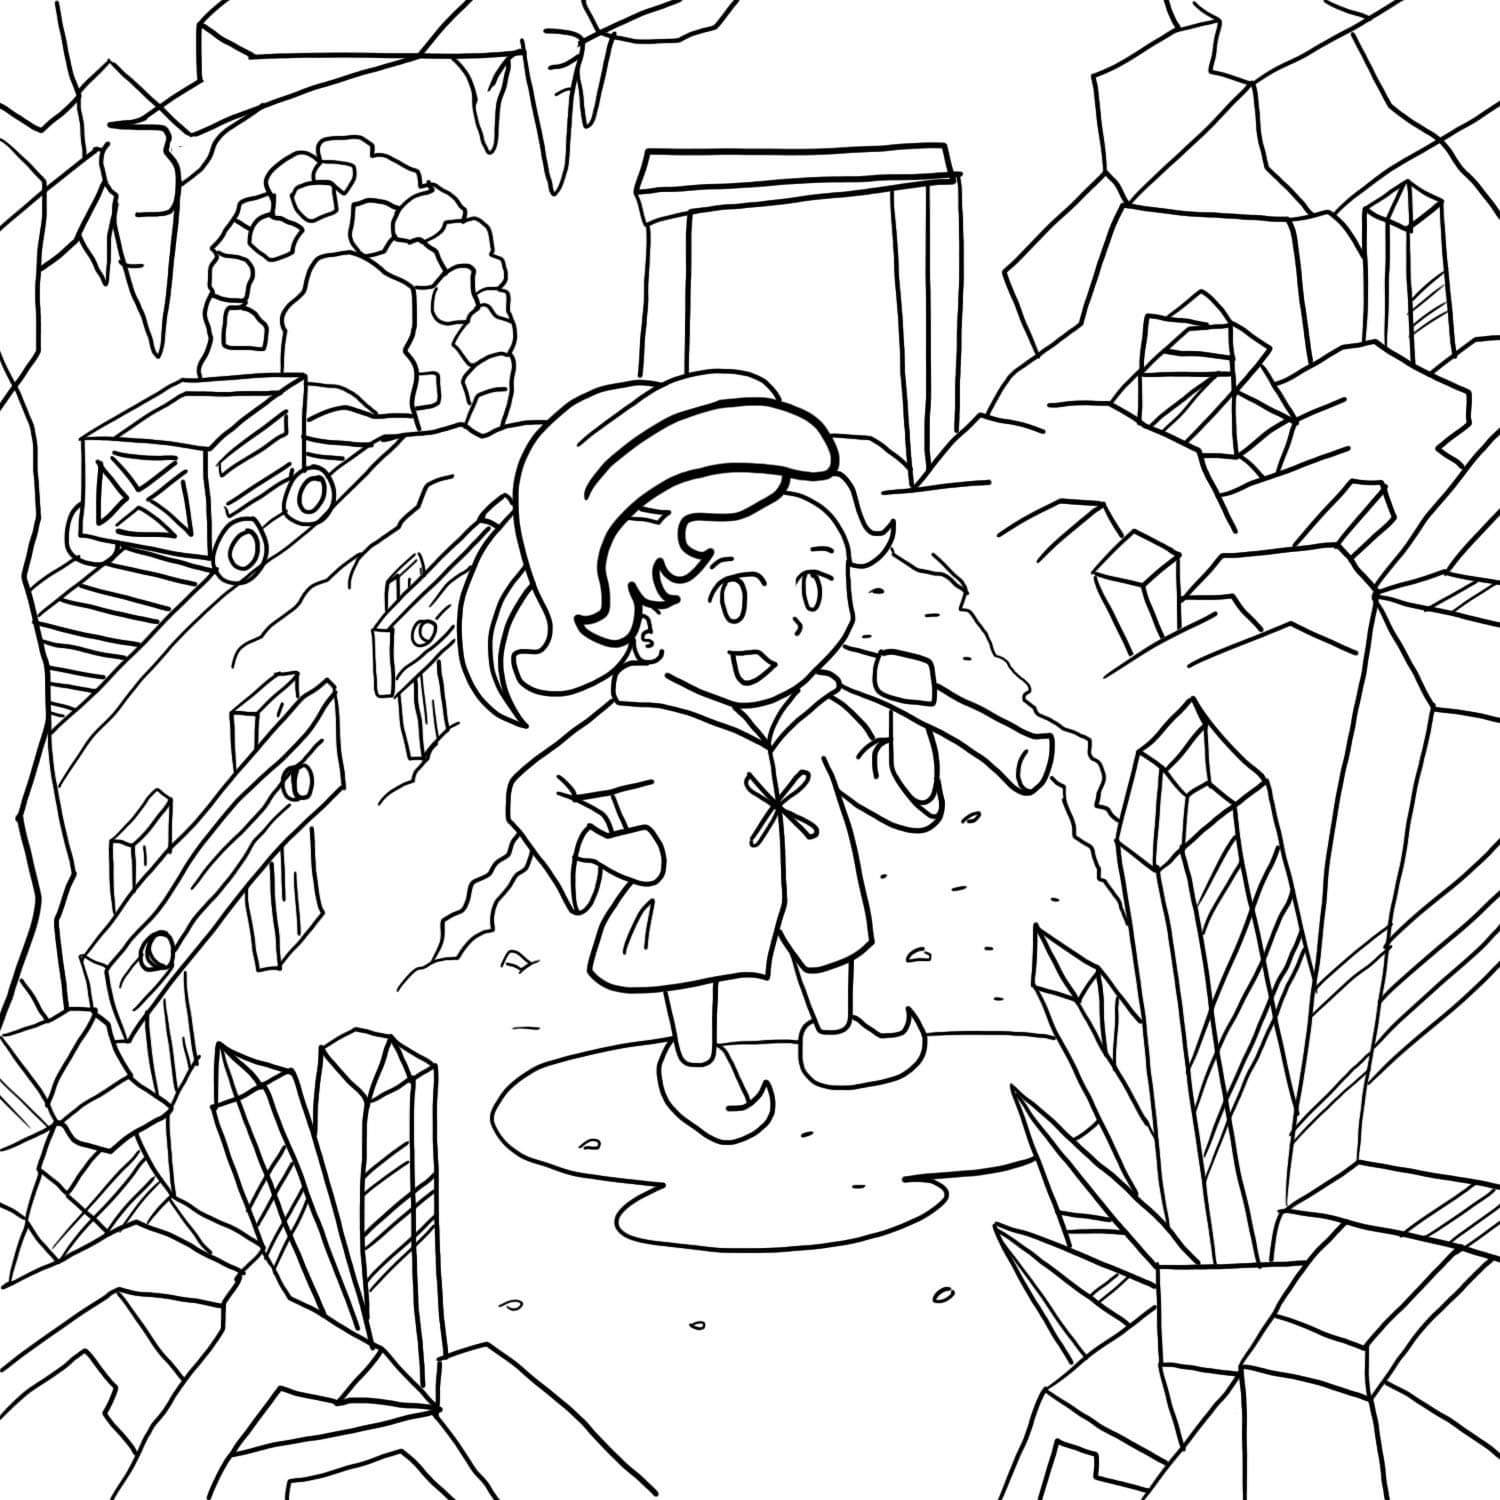 9. Precious Our adventurous baby miner searches for precious gems and crystals!